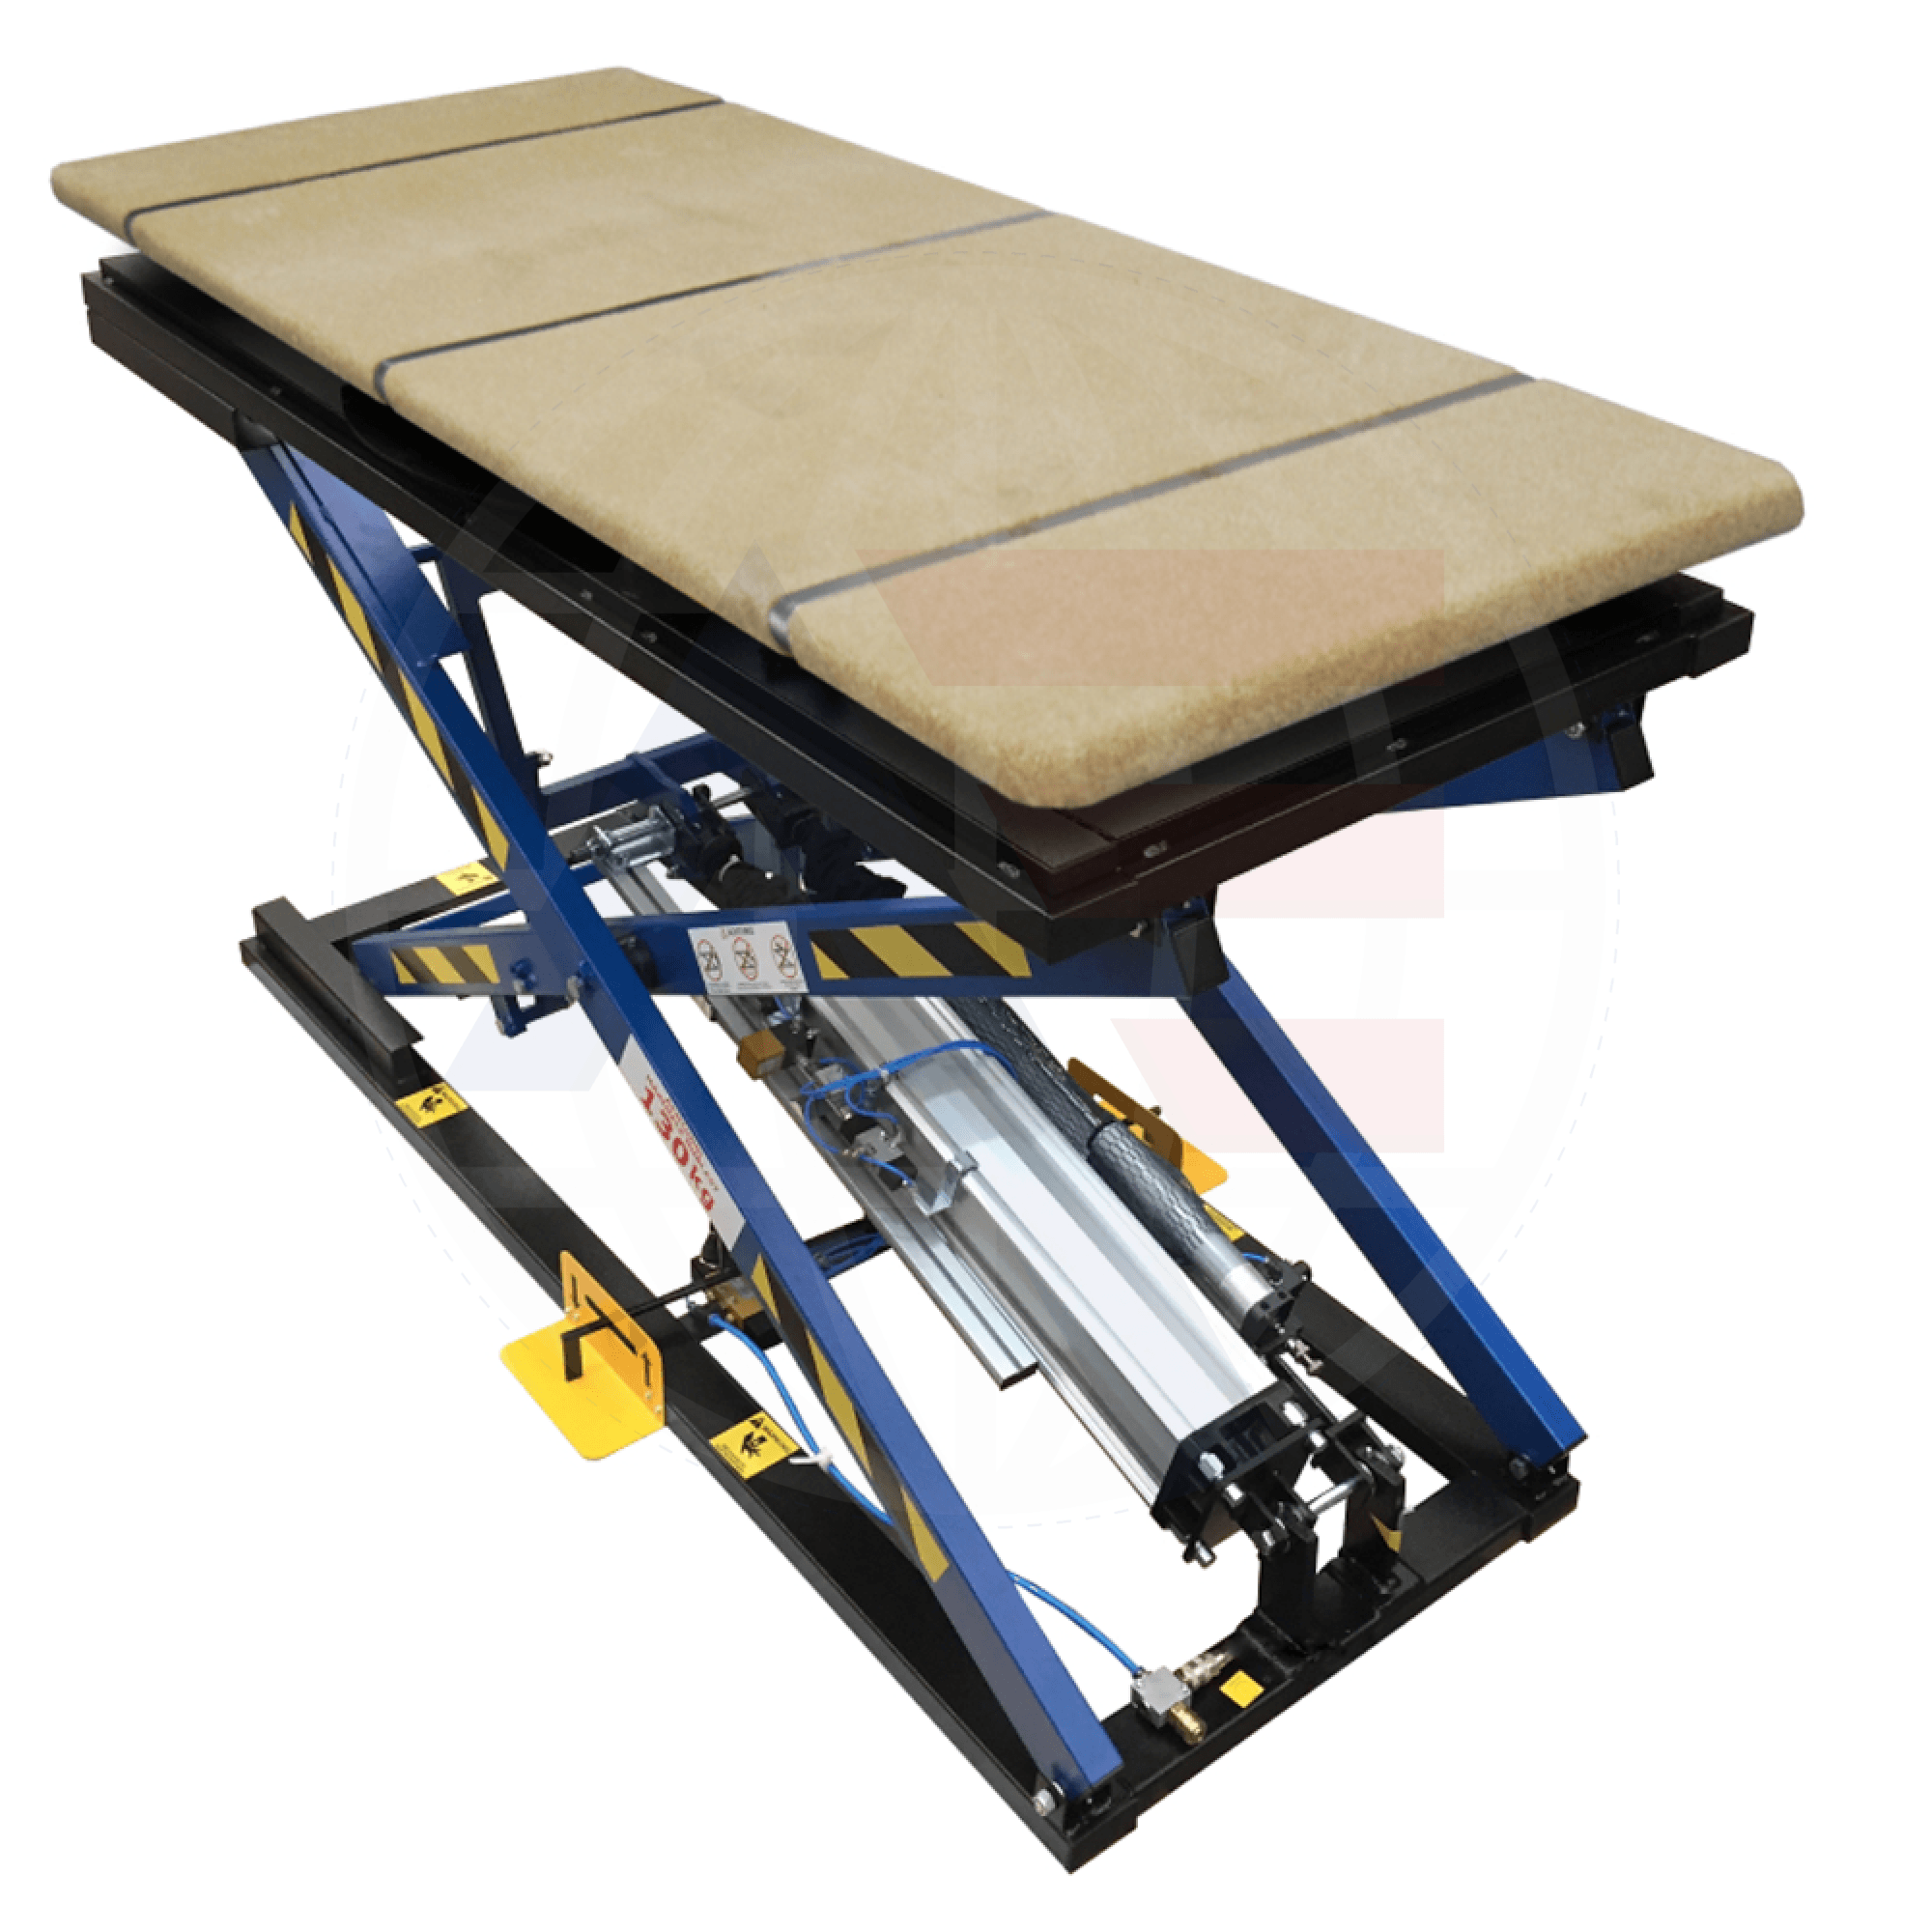 Rexel St-3/kpo Pneumatic Lifting Table Tables